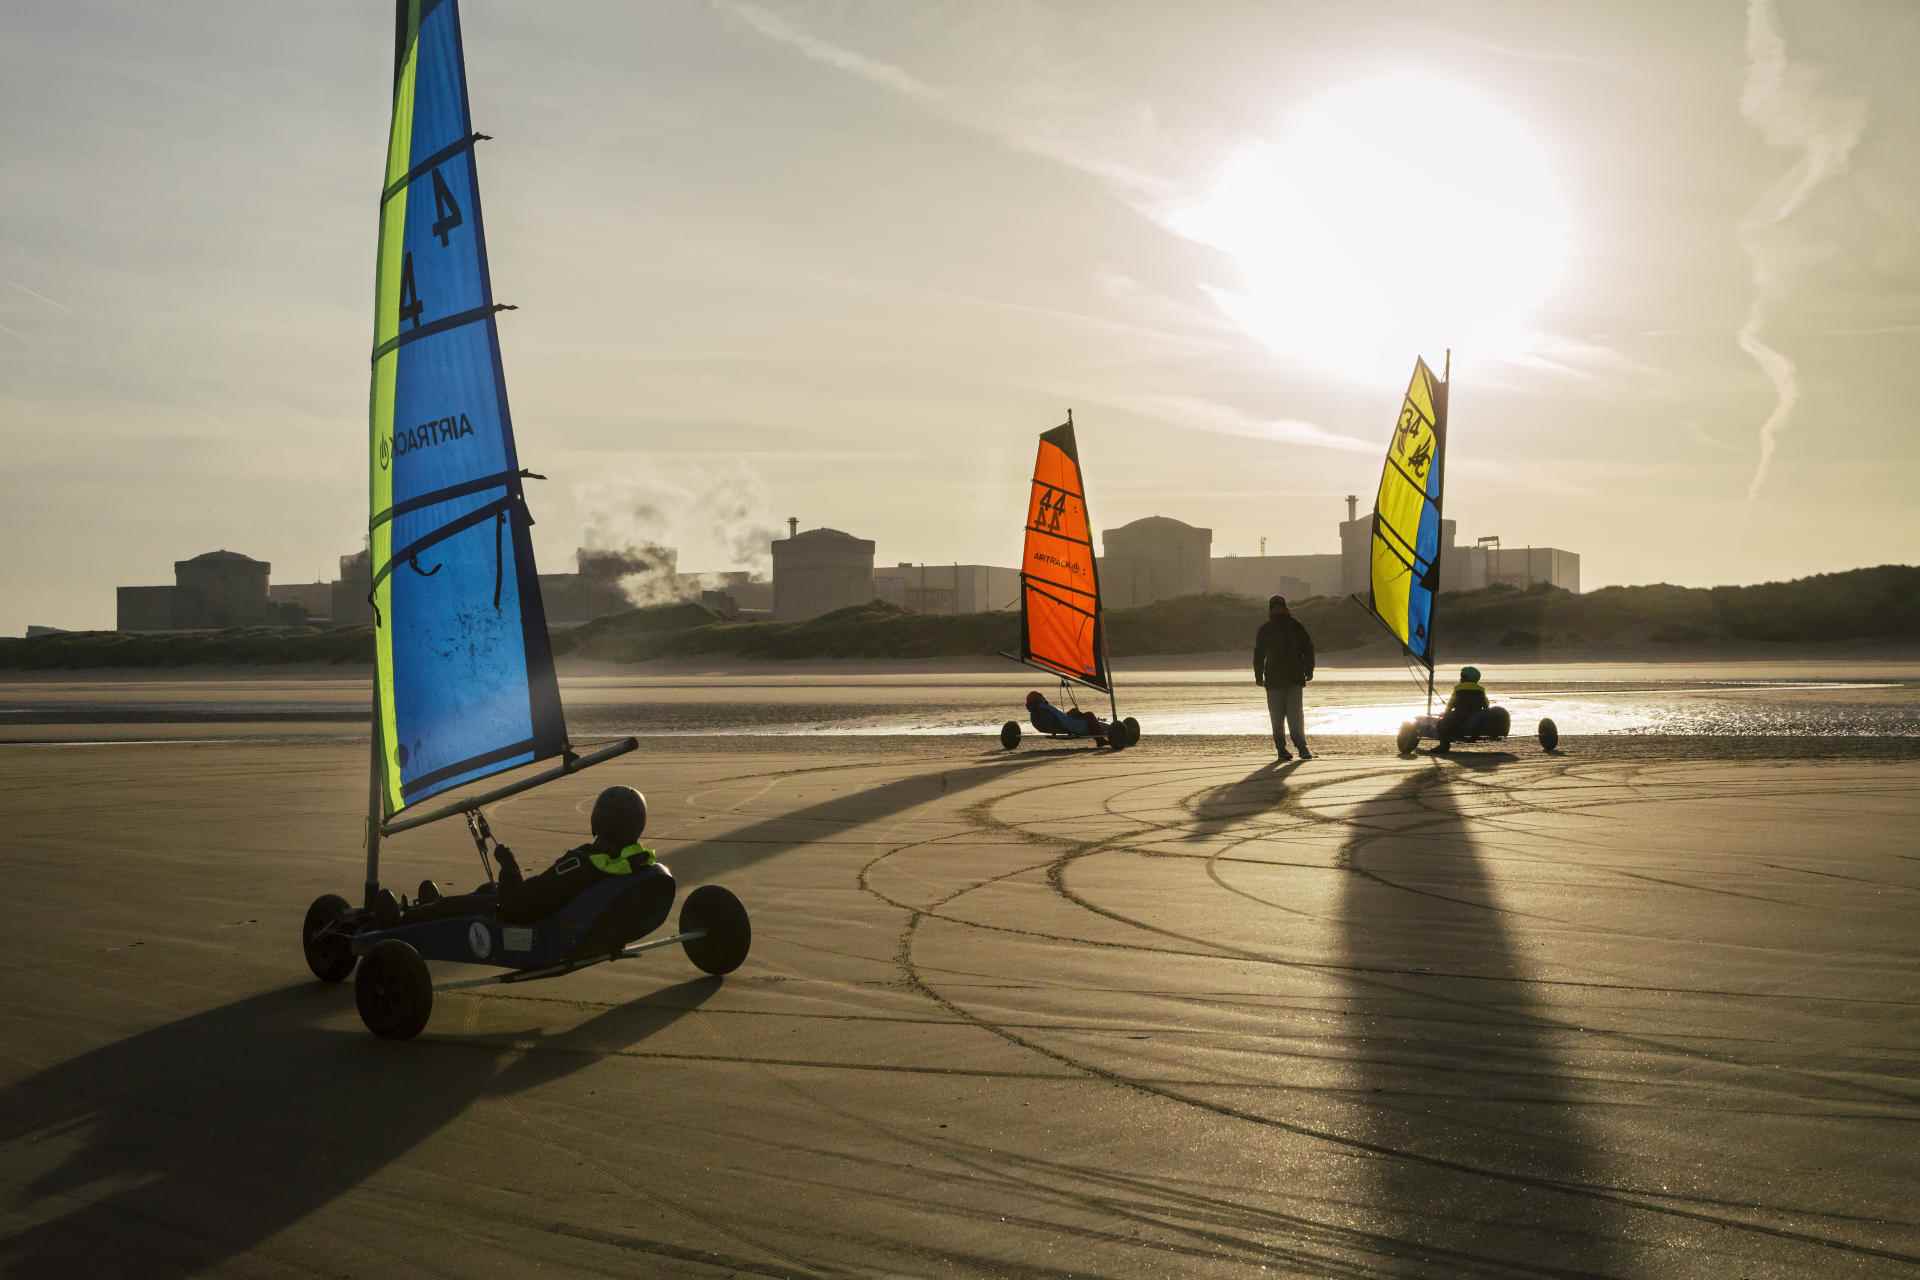 Sand yachting is one of the most popular sporting activities on Gravelines beach, which is 3 kilometers long.